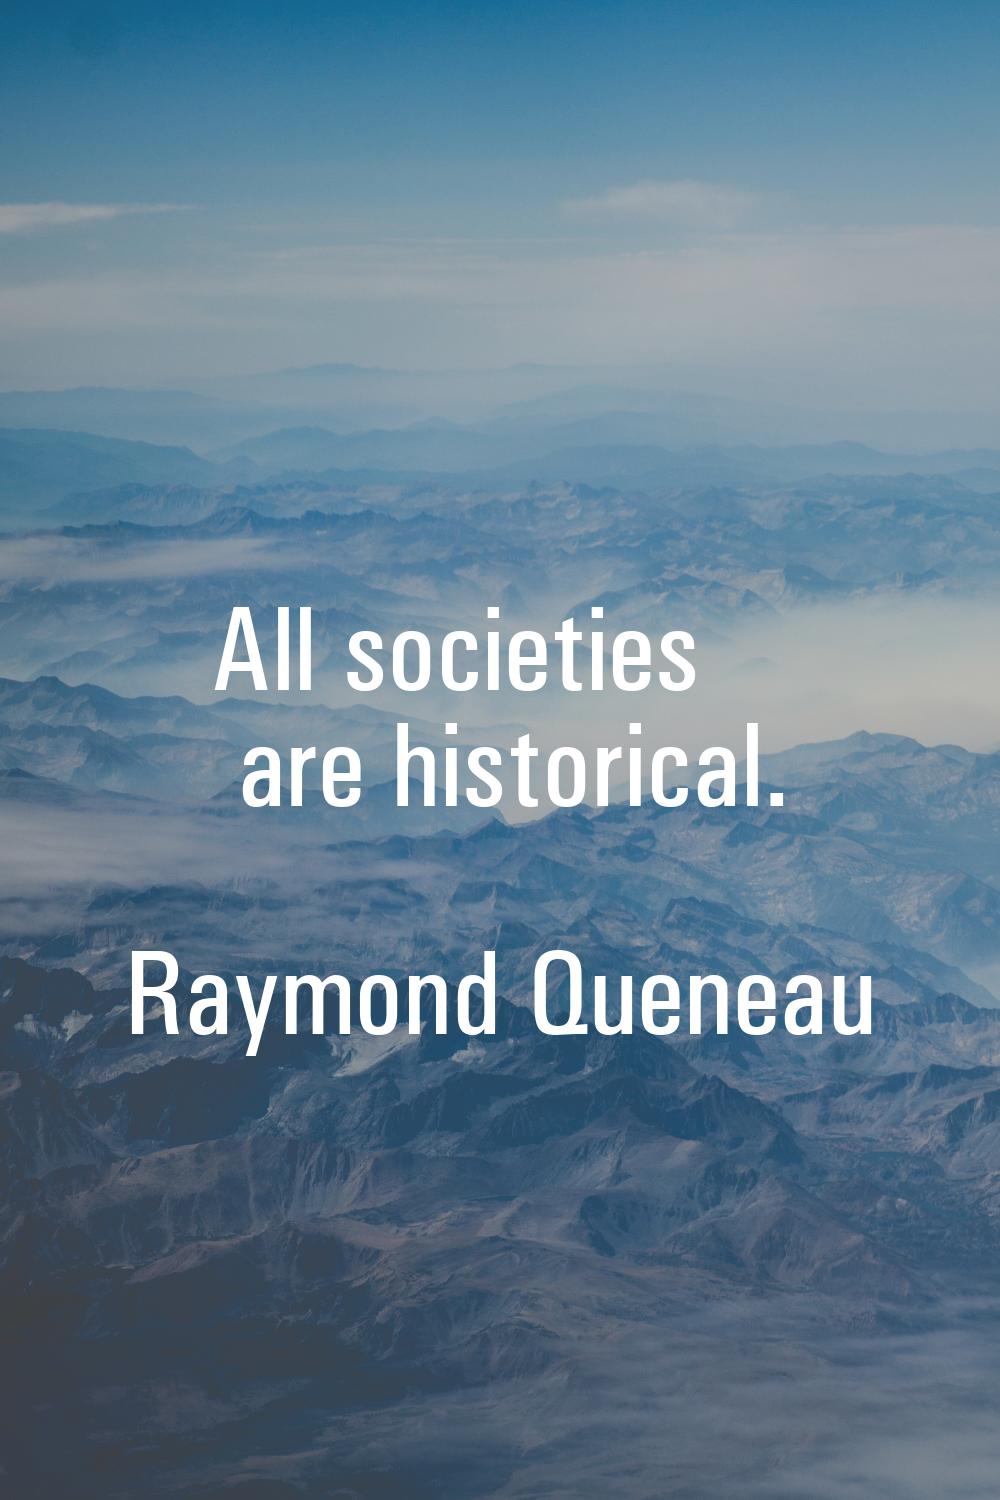 All societies are historical.